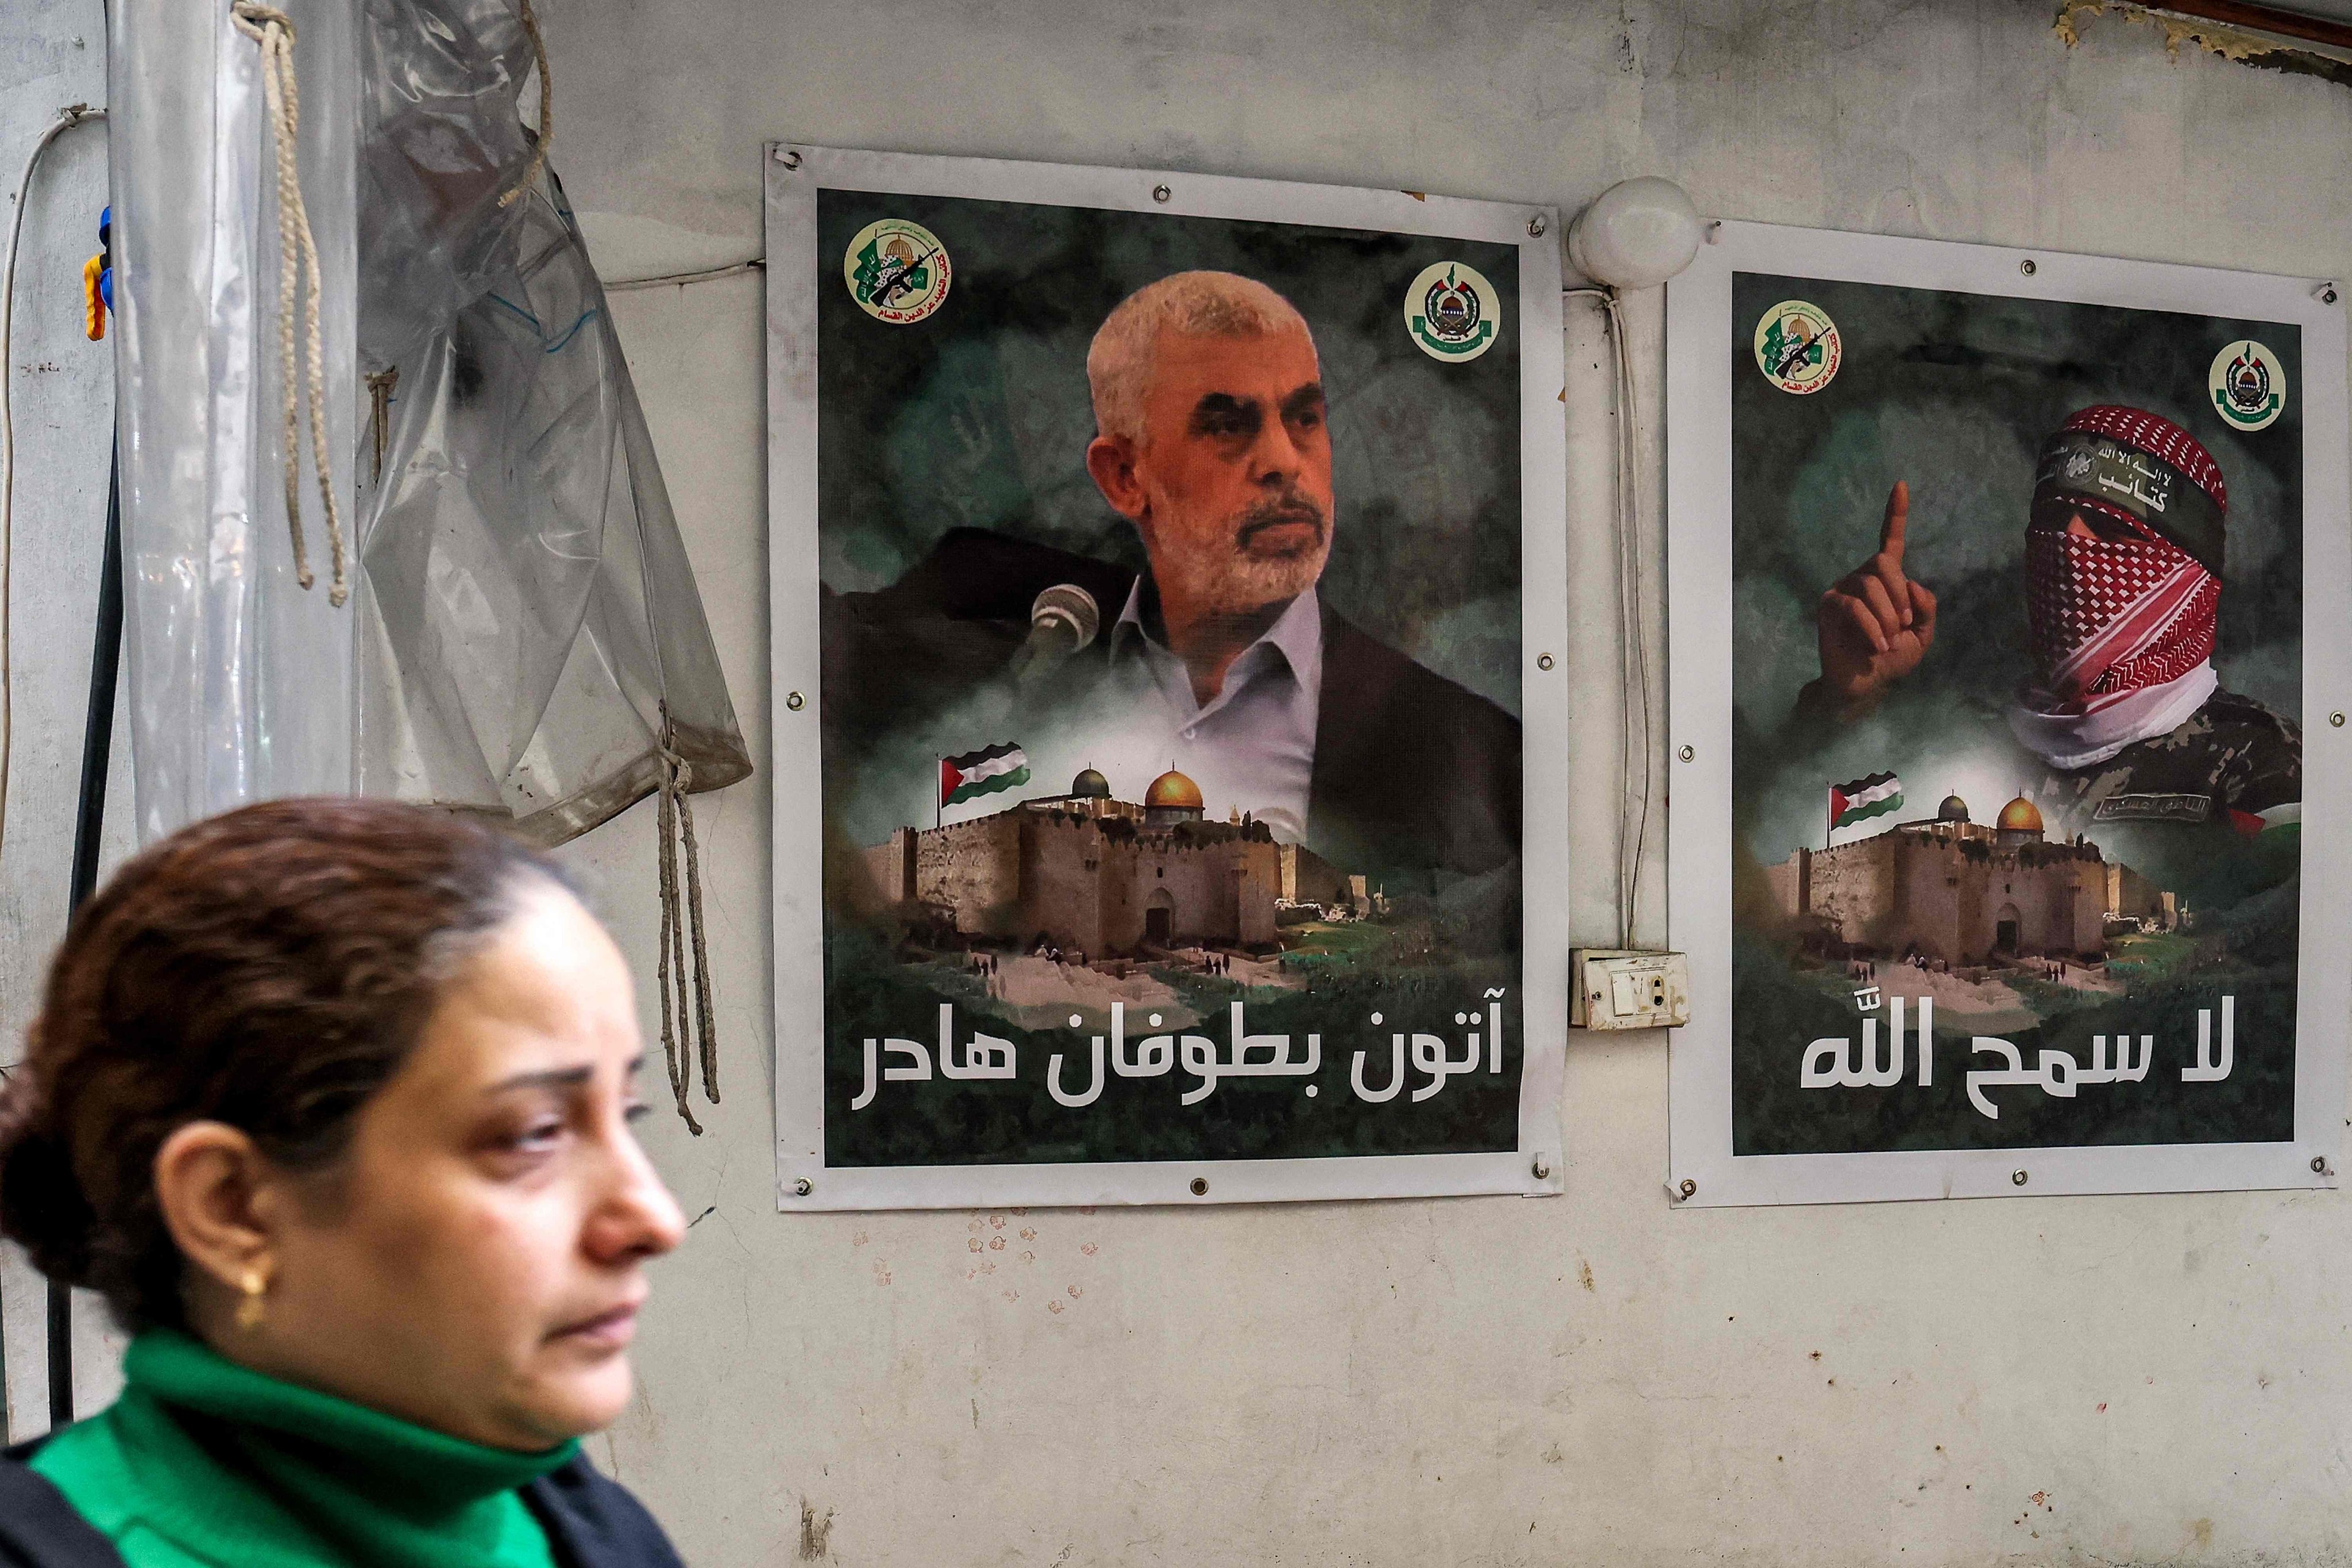 On February 5, a woman in the Burj al-Barajneh refugee camp in Beirut, Lebanon walks past posters depicting Yahya Sinwar, head of the political wing of Hamas, and Abu Obeida, the masked spokesperson of the Ezzedeen al-Qassam Brigades (Hamas’ armed wing). Photo: AFP